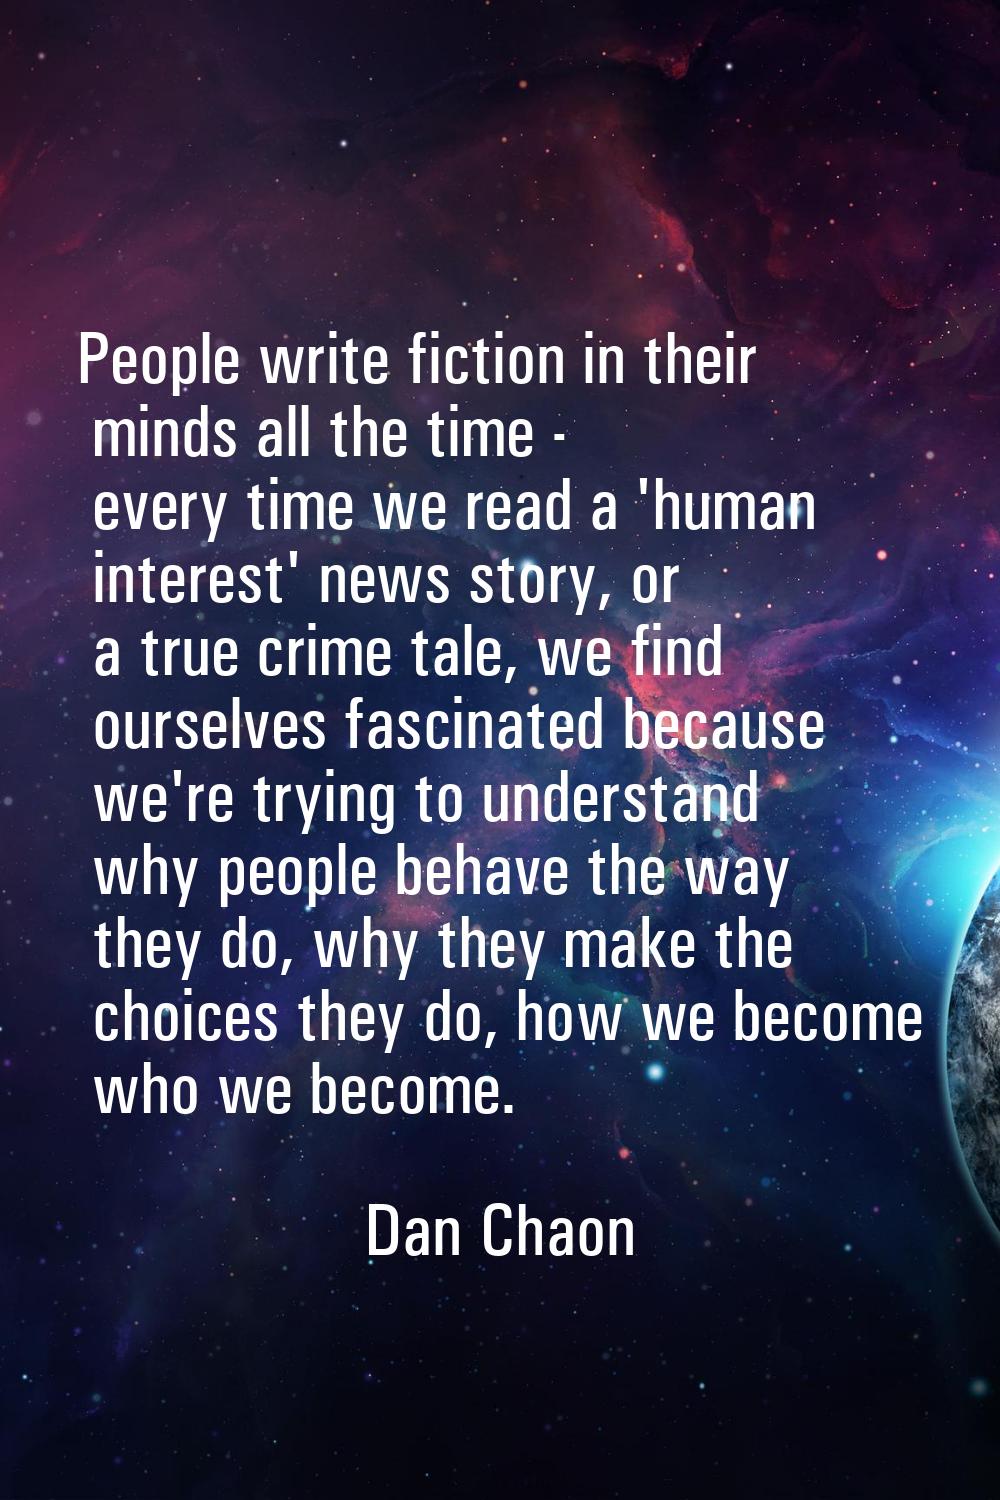 People write fiction in their minds all the time - every time we read a 'human interest' news story